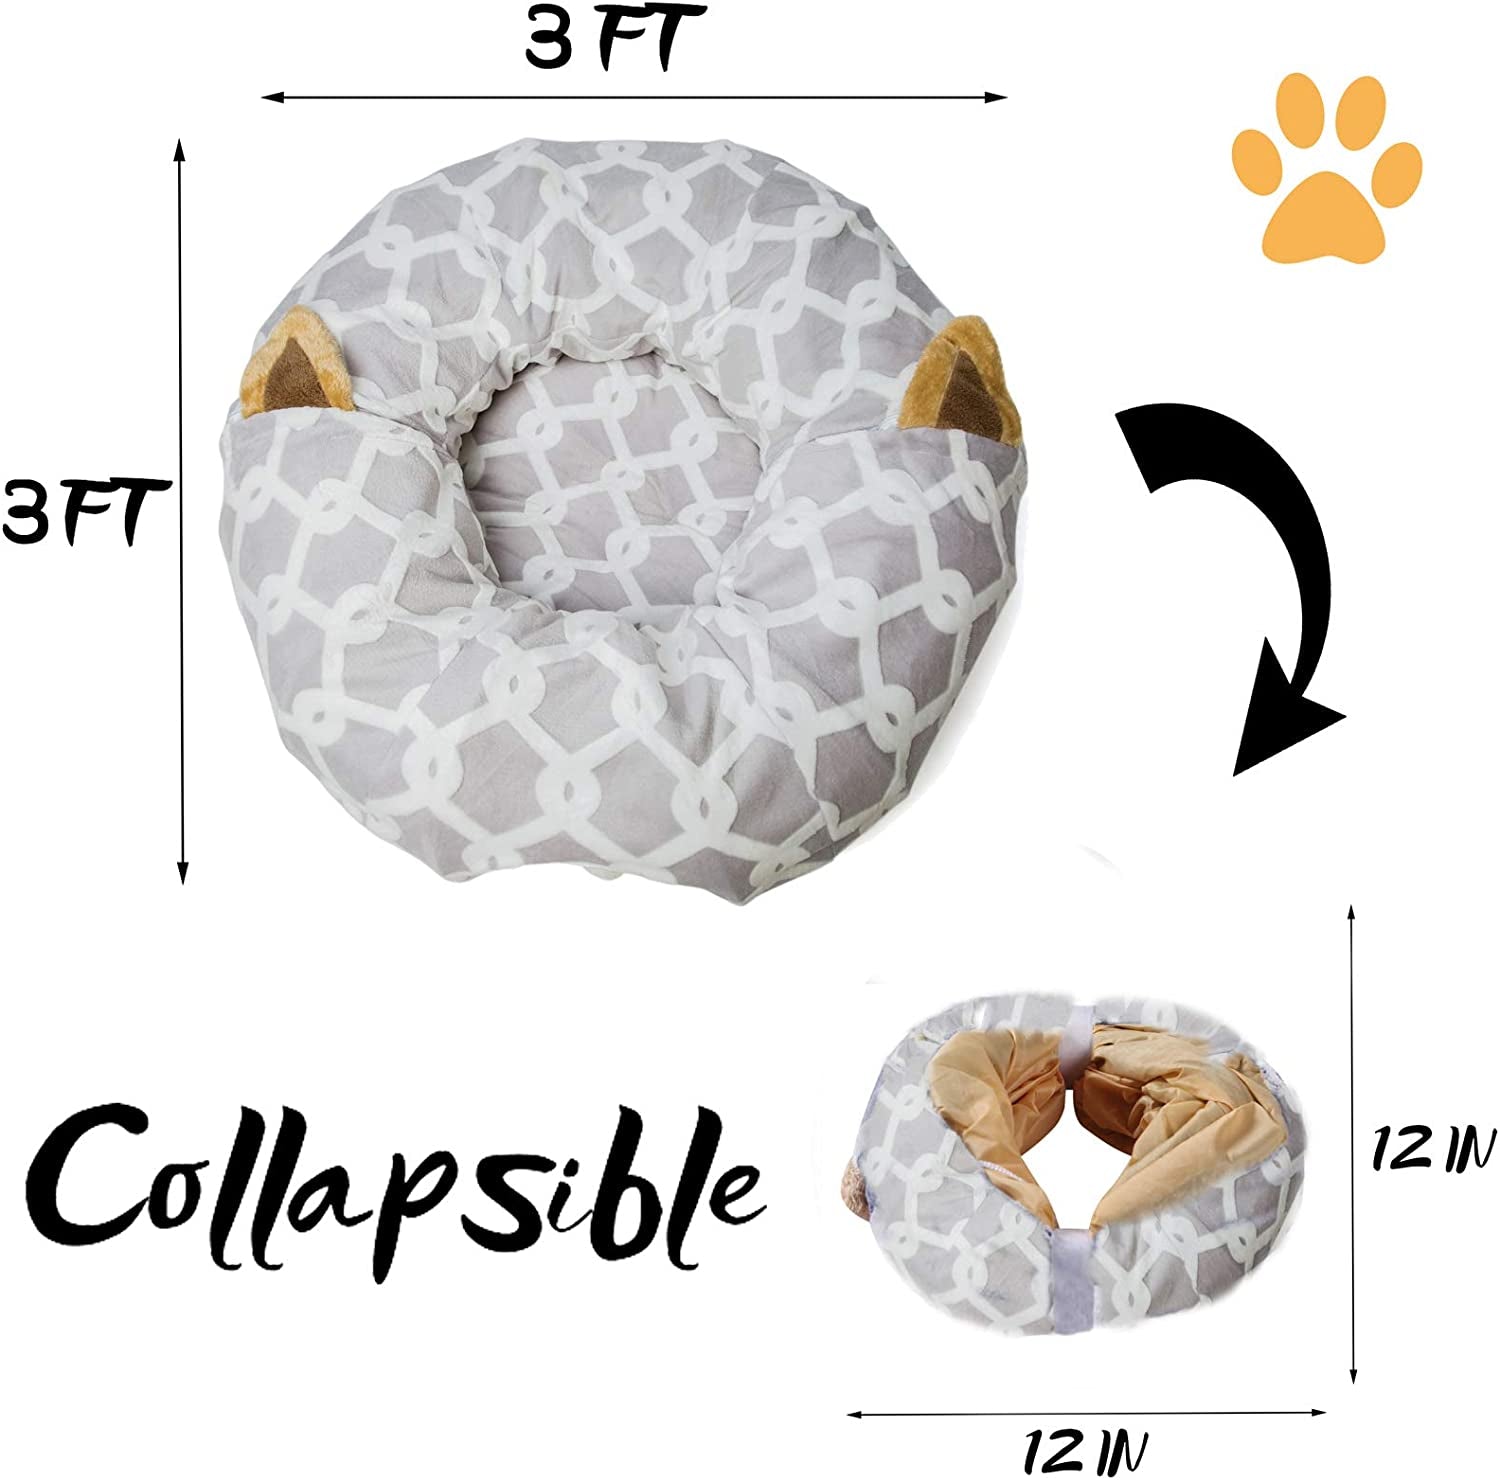 Large Cat Tunnel Bed with Plush Cover,Fluffy Toy Balls, Small Cushion and Flexible Design- 10 Inch Diameter, 3 Ft Length- Great for Cats, and Small Dogs, Gray Geometric Figure